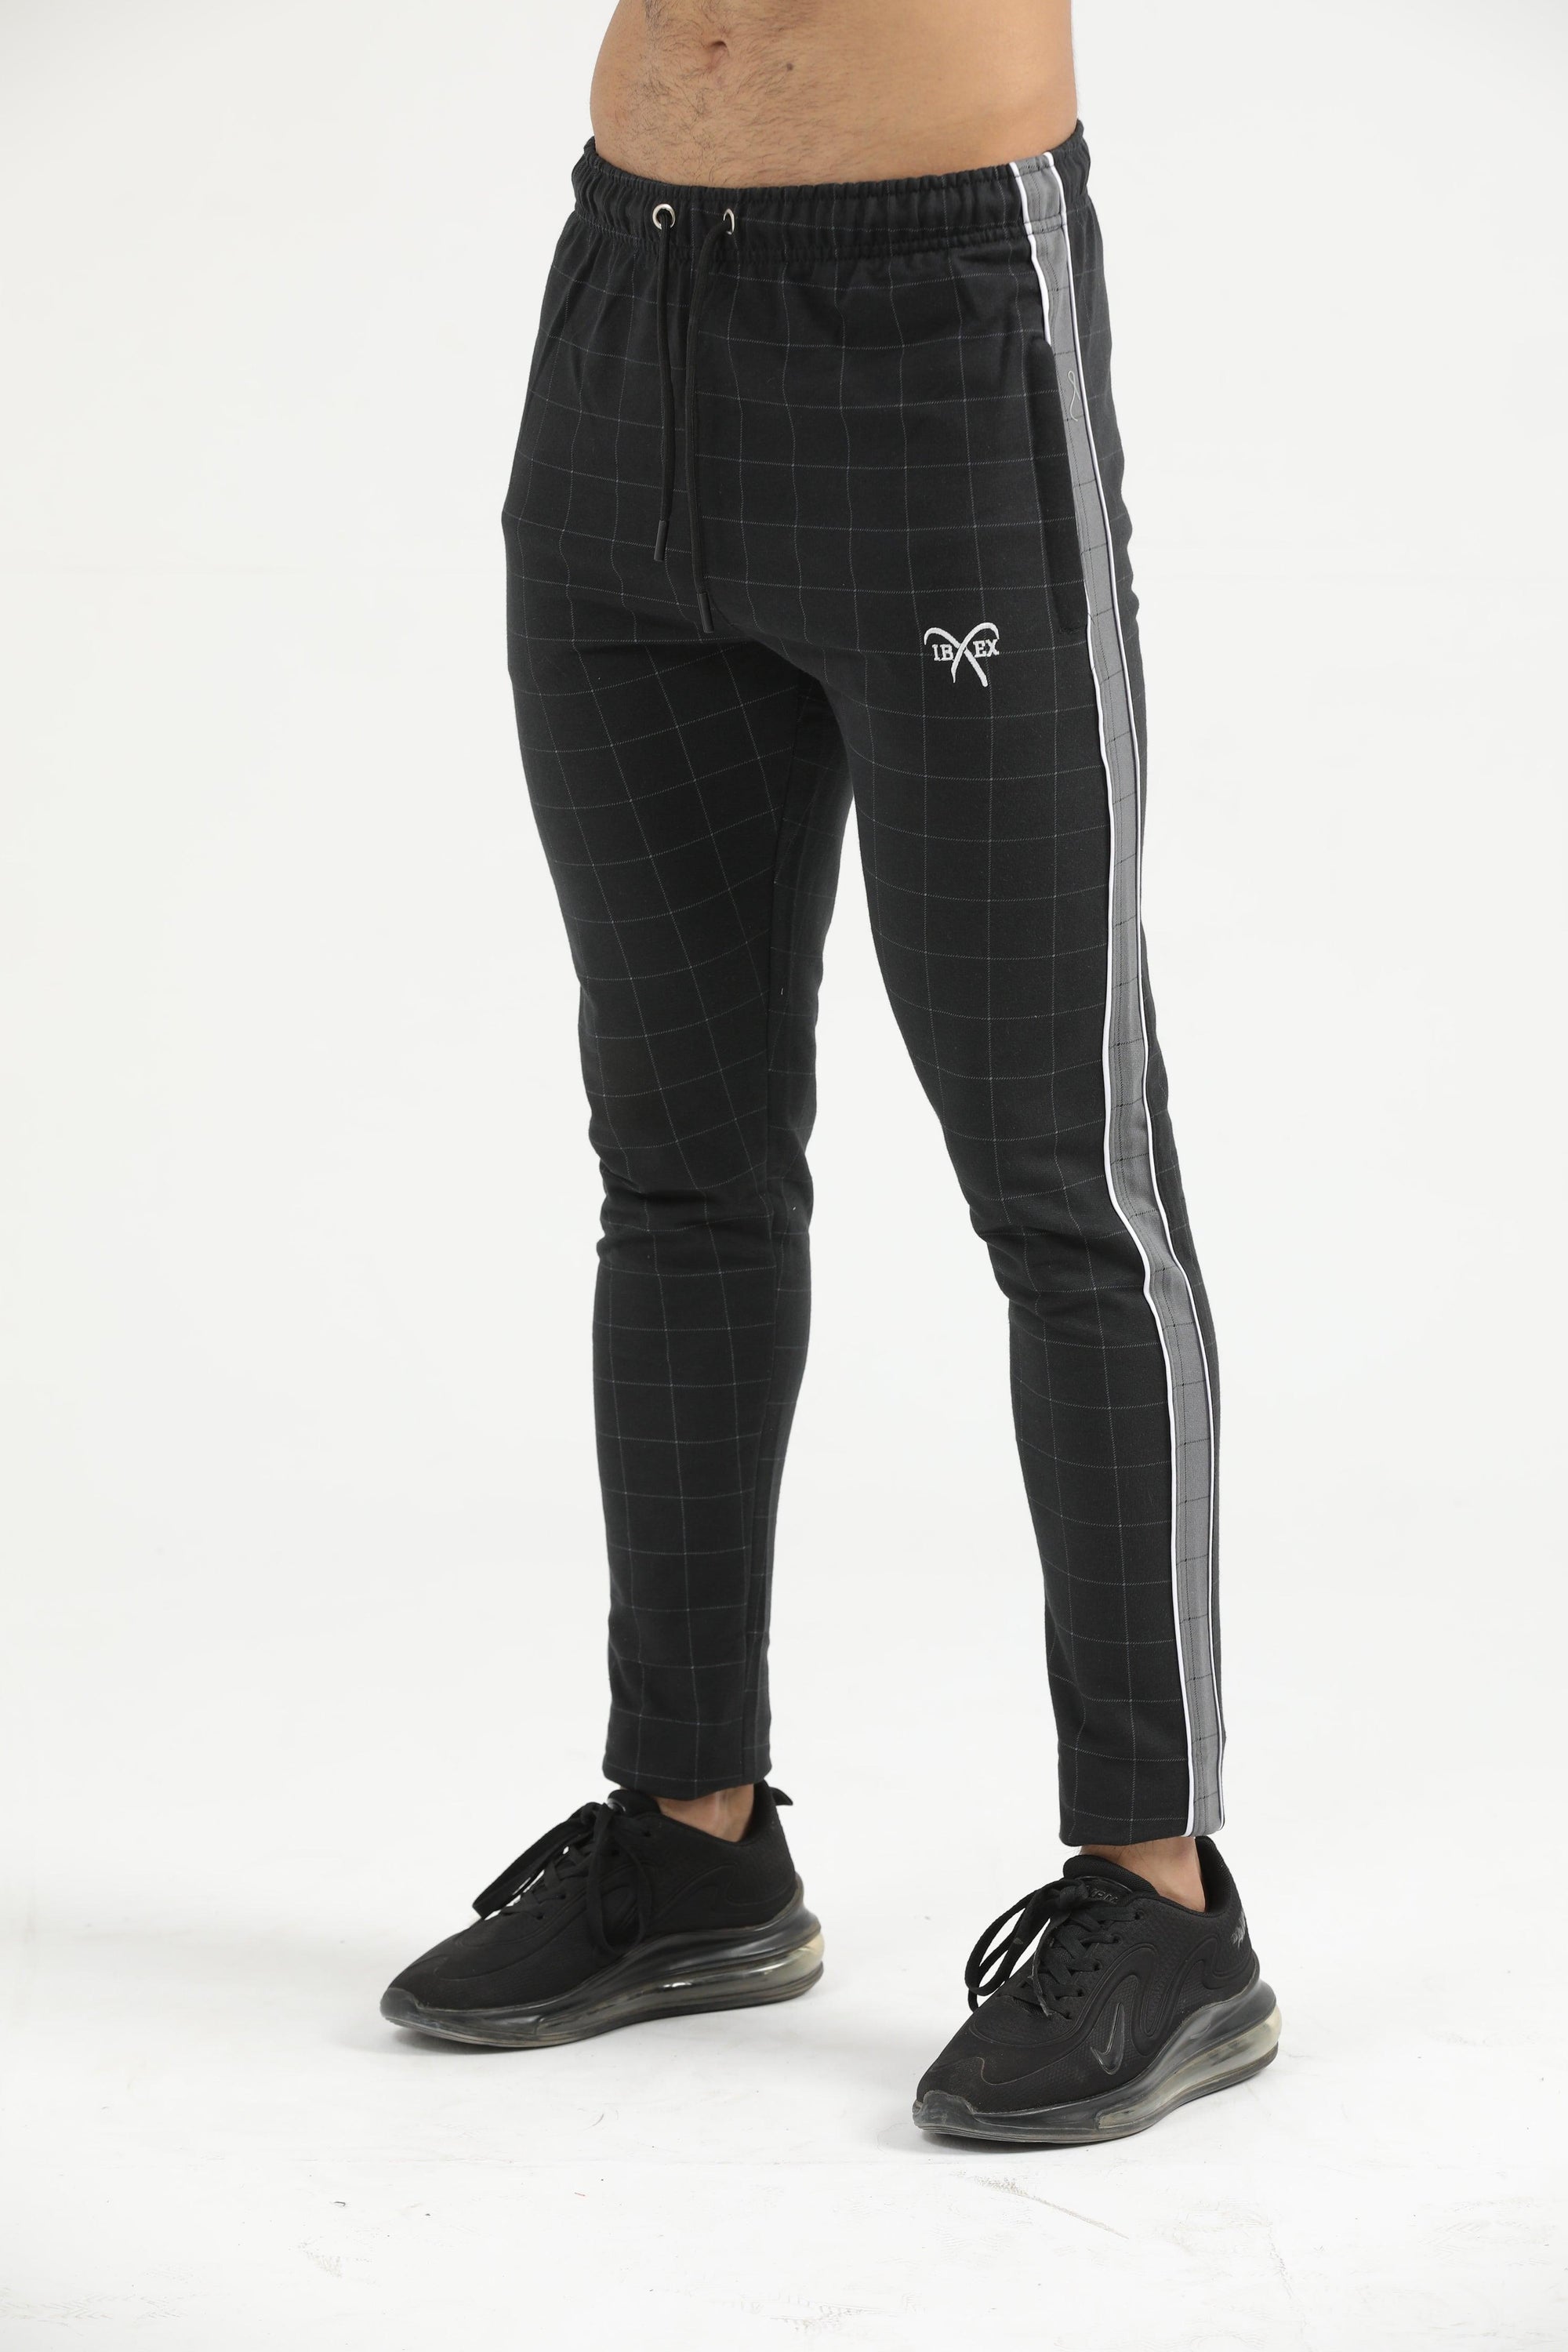 Black Checker Trouser with Grey Side Panel and Piping - Ibex Collections